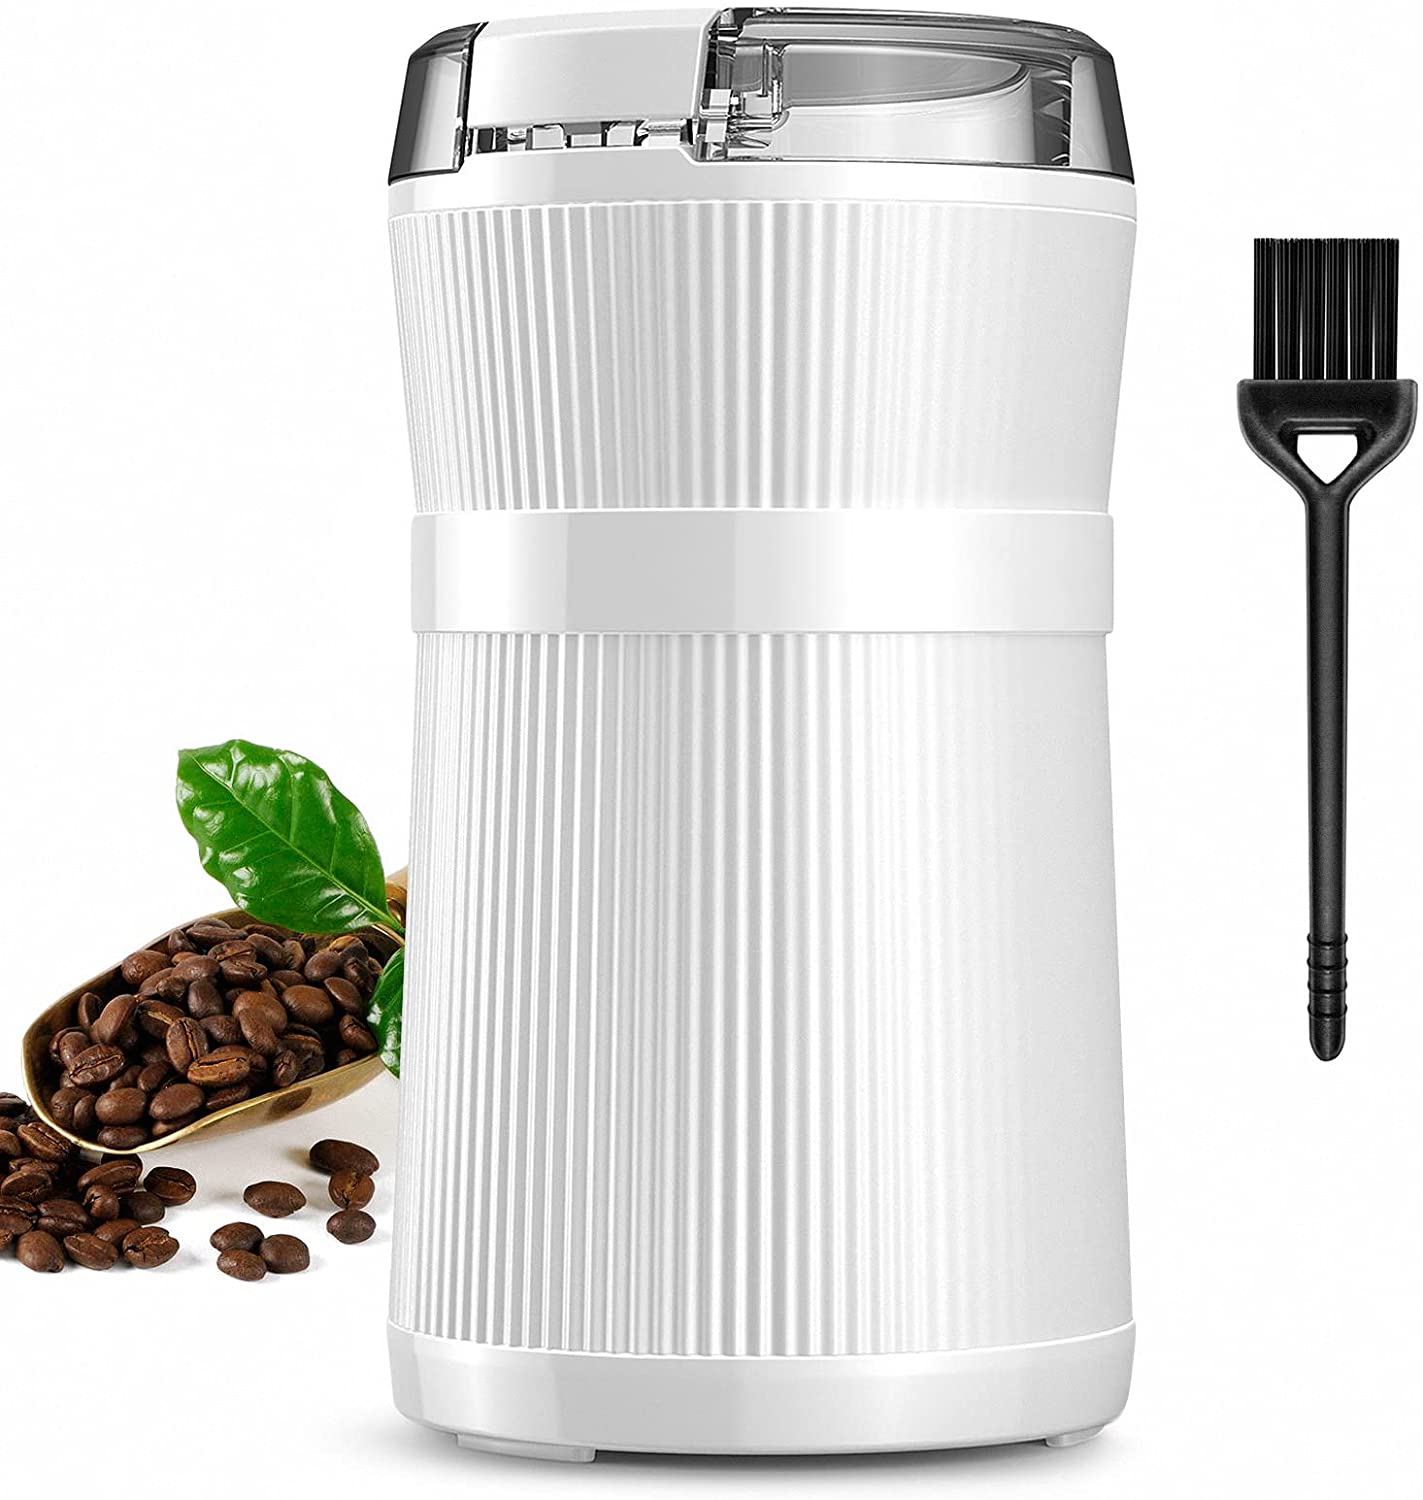 Generic Electric Coffee Grinder, Quiet & Efficient Spice Mill with One-Touch Control, 50 g Coffee Bean Mill with 200 W Strong Motor for Beans, Seeds, Spices, Stainless Steel Bowl and Blades, White